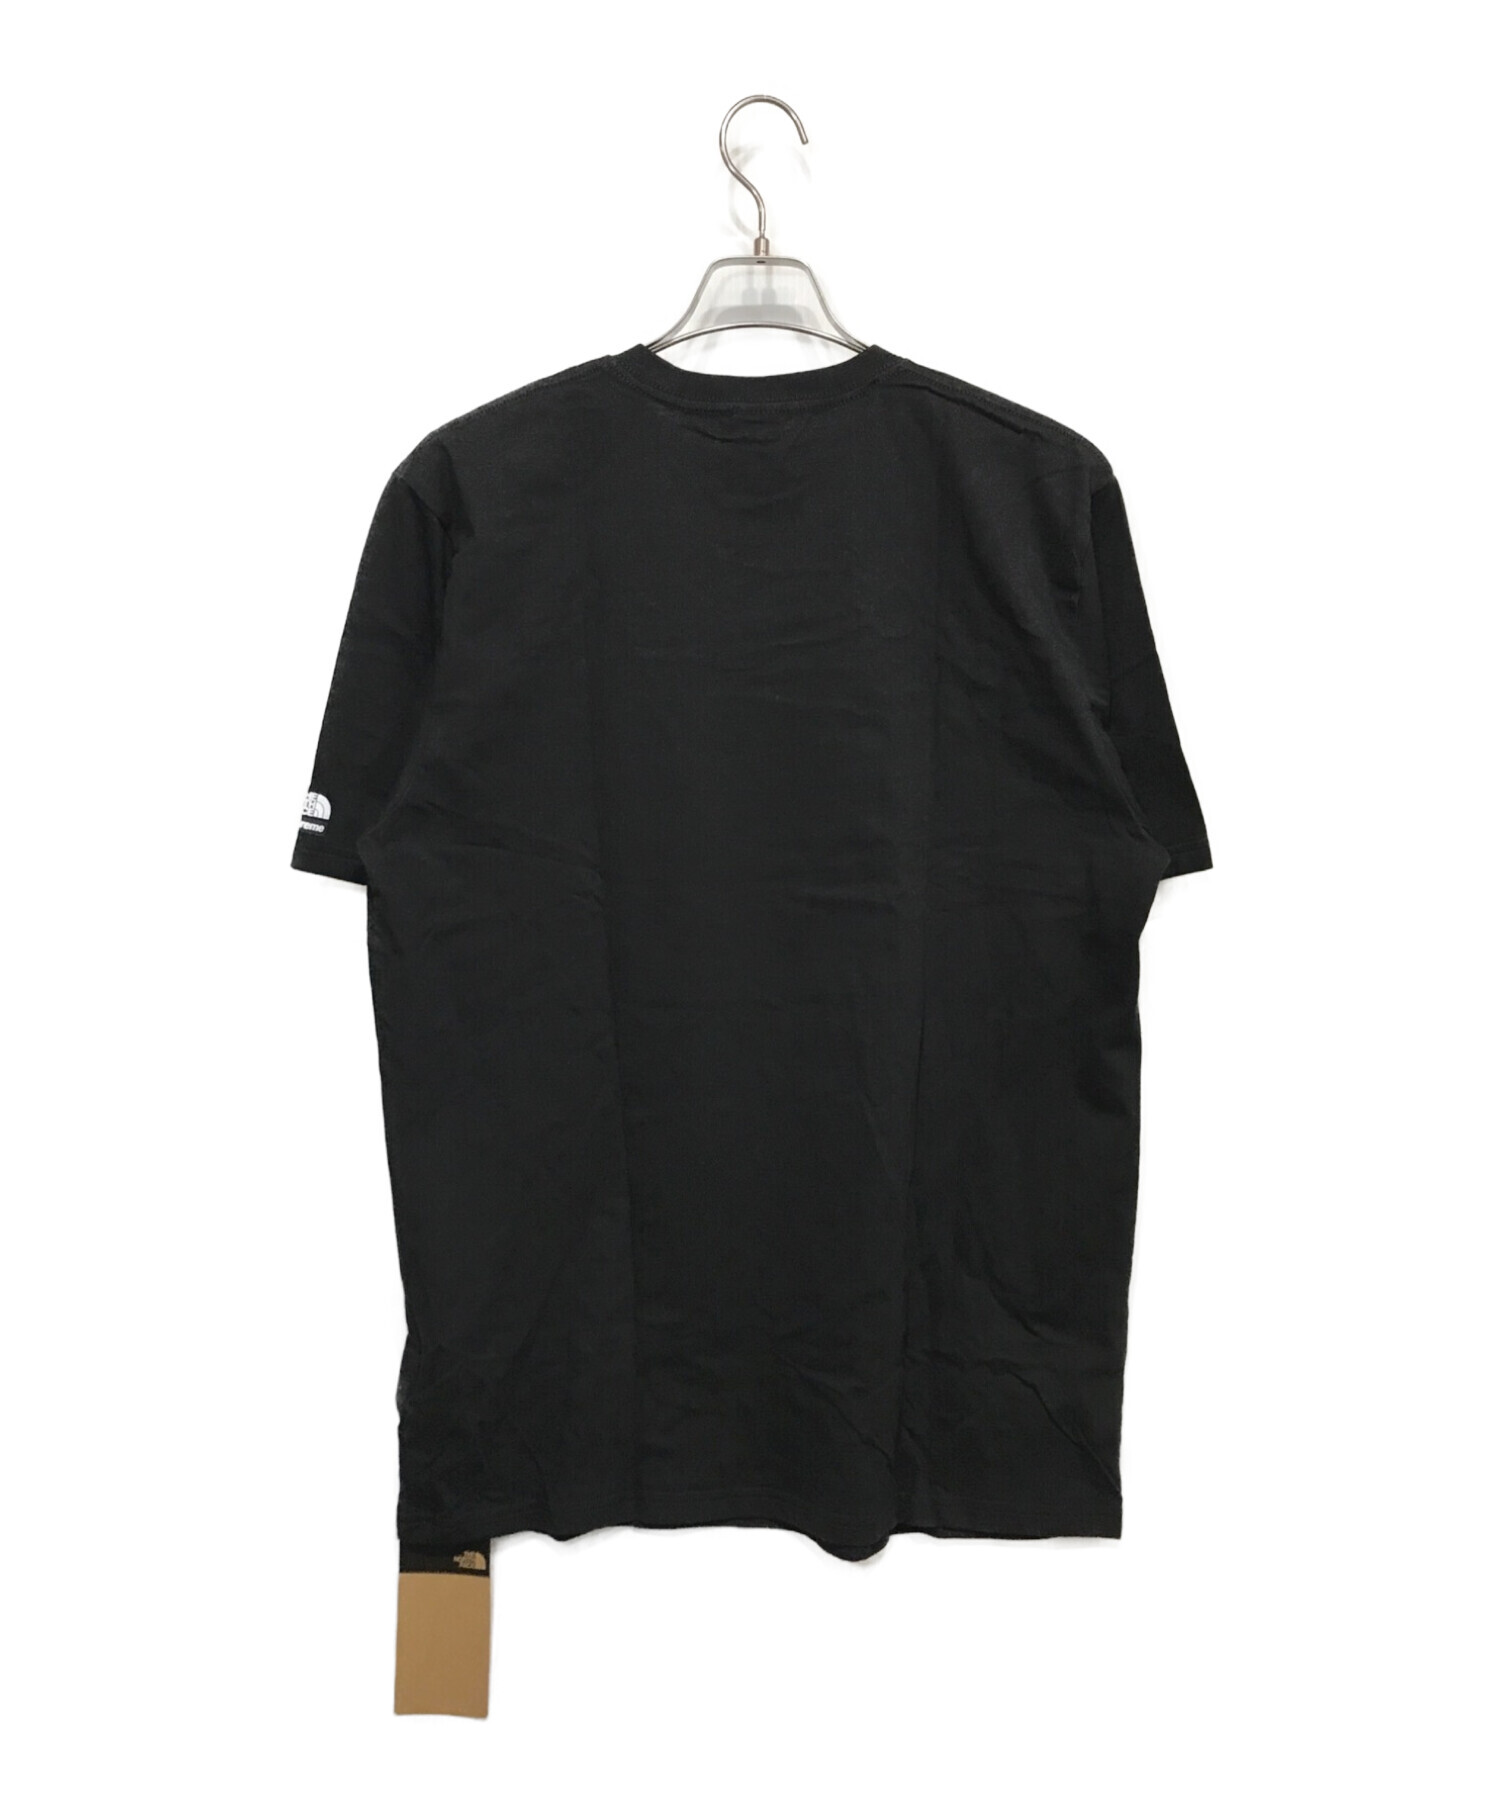 Tシャツ/カットソー(半袖/袖なし)supreme the north face Sketch tee black